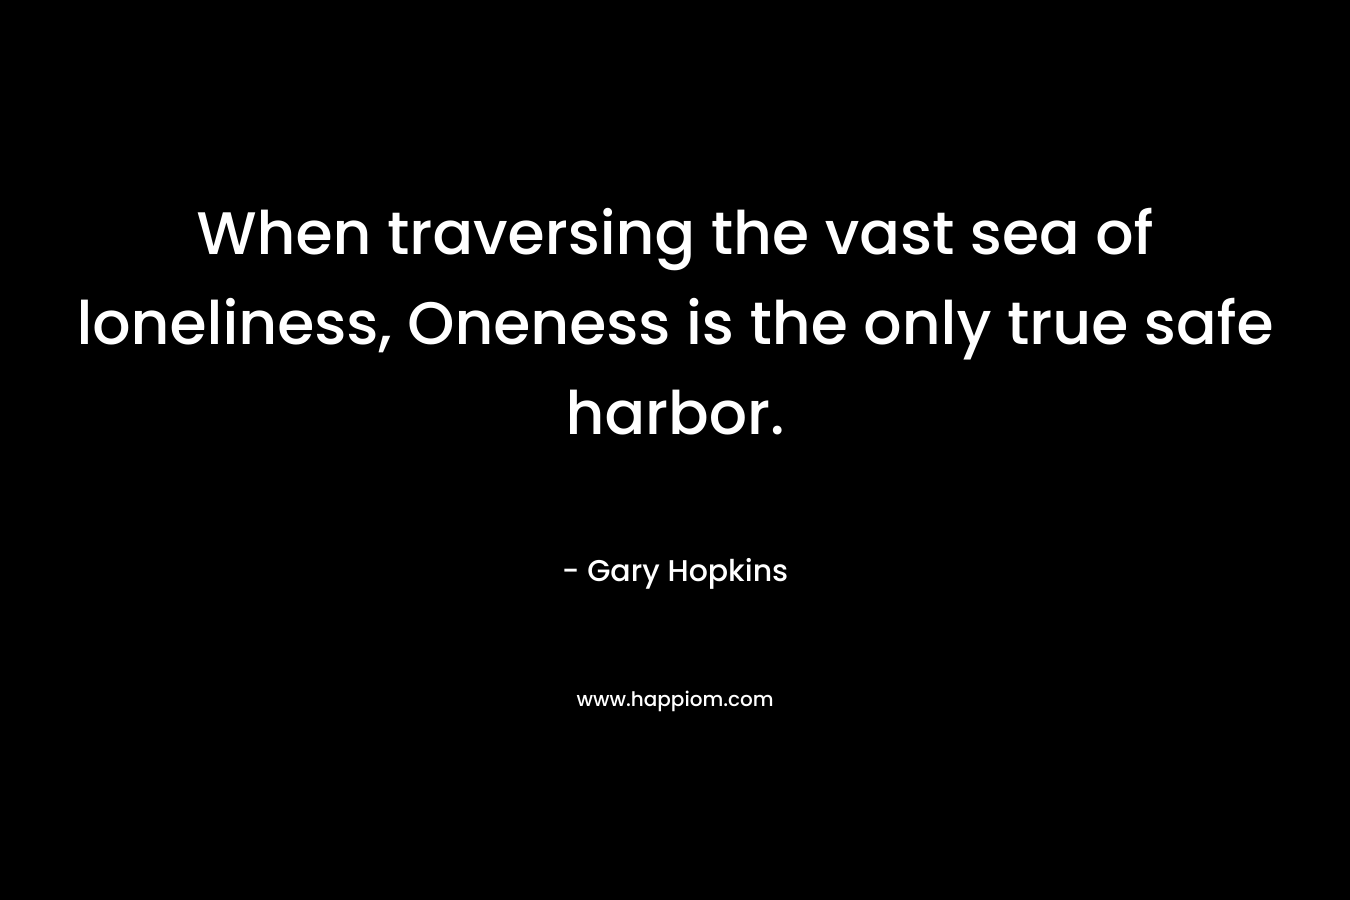 When traversing the vast sea of loneliness, Oneness is the only true safe harbor.